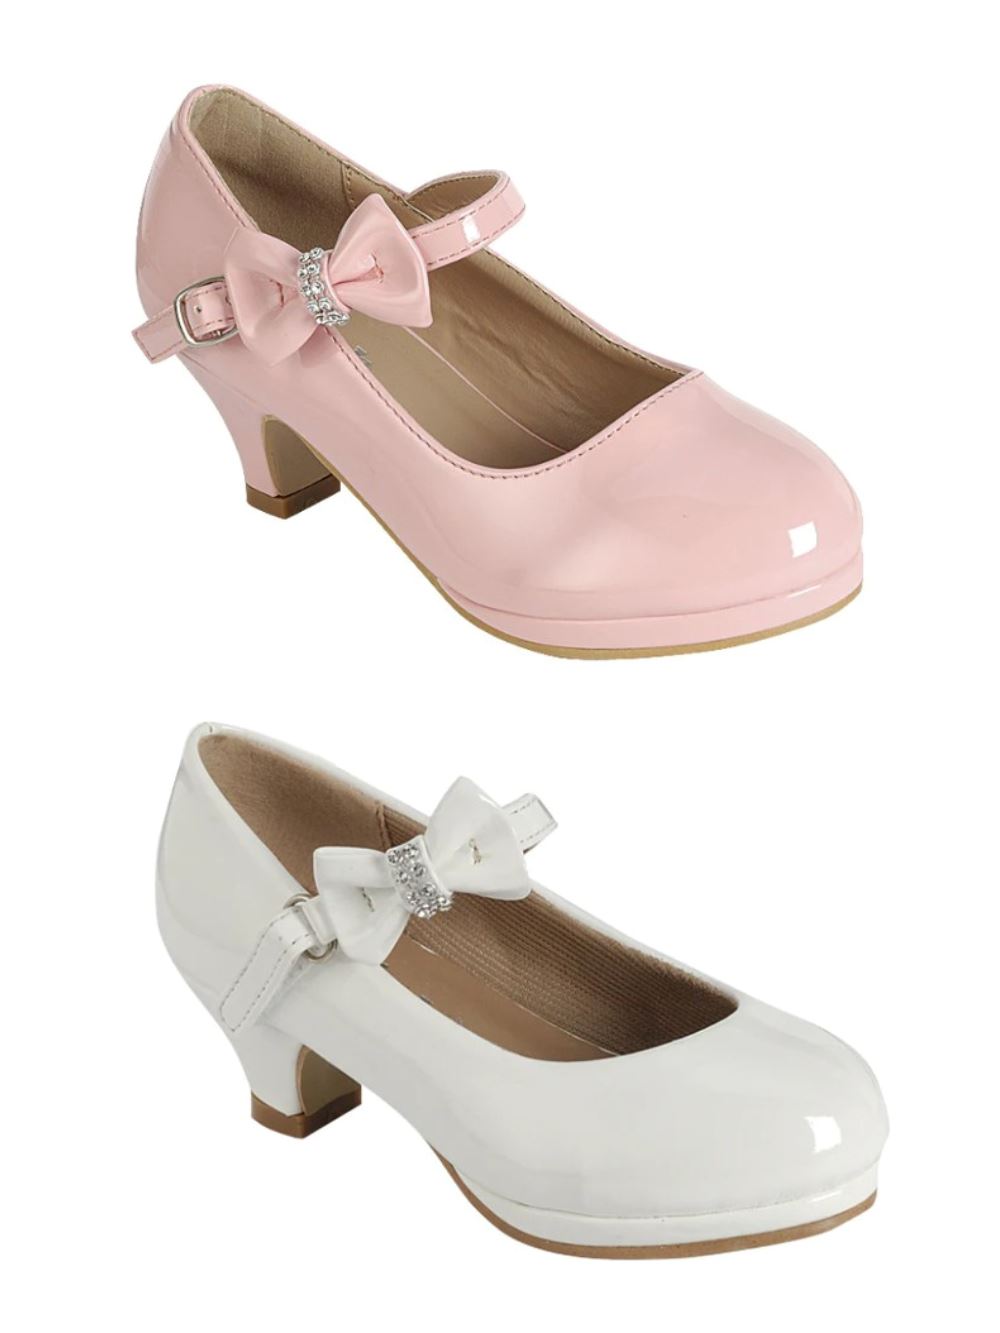 Buy Belly Shoes For Girls Online In India At Best Prices | Tata CLiQ